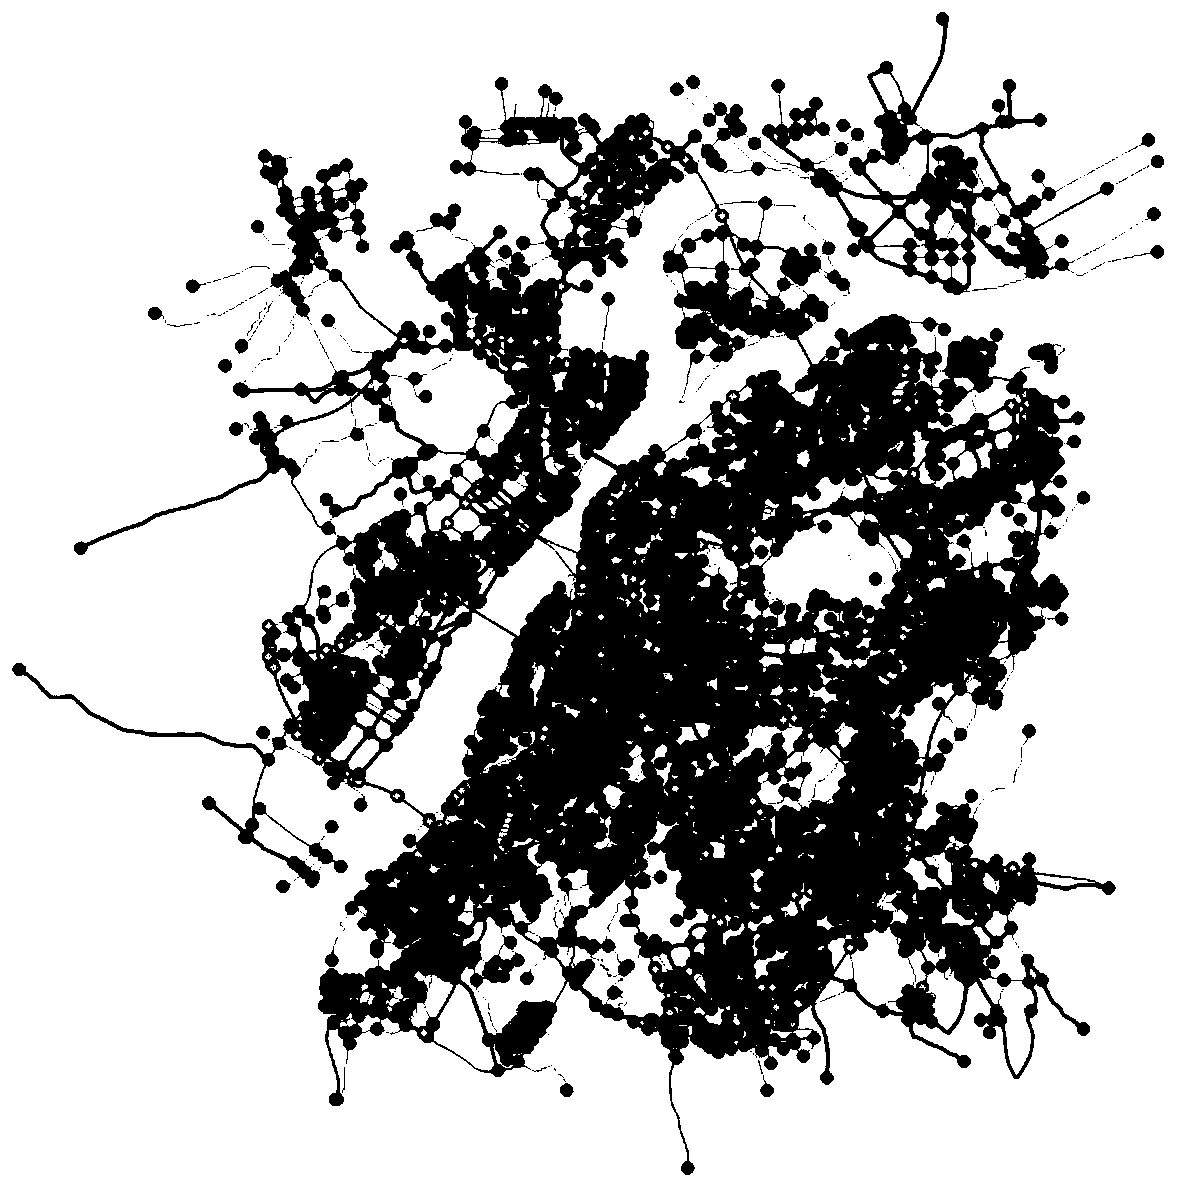 Voronoi graph-based method for automatically dividing traffic road network into traffic cells